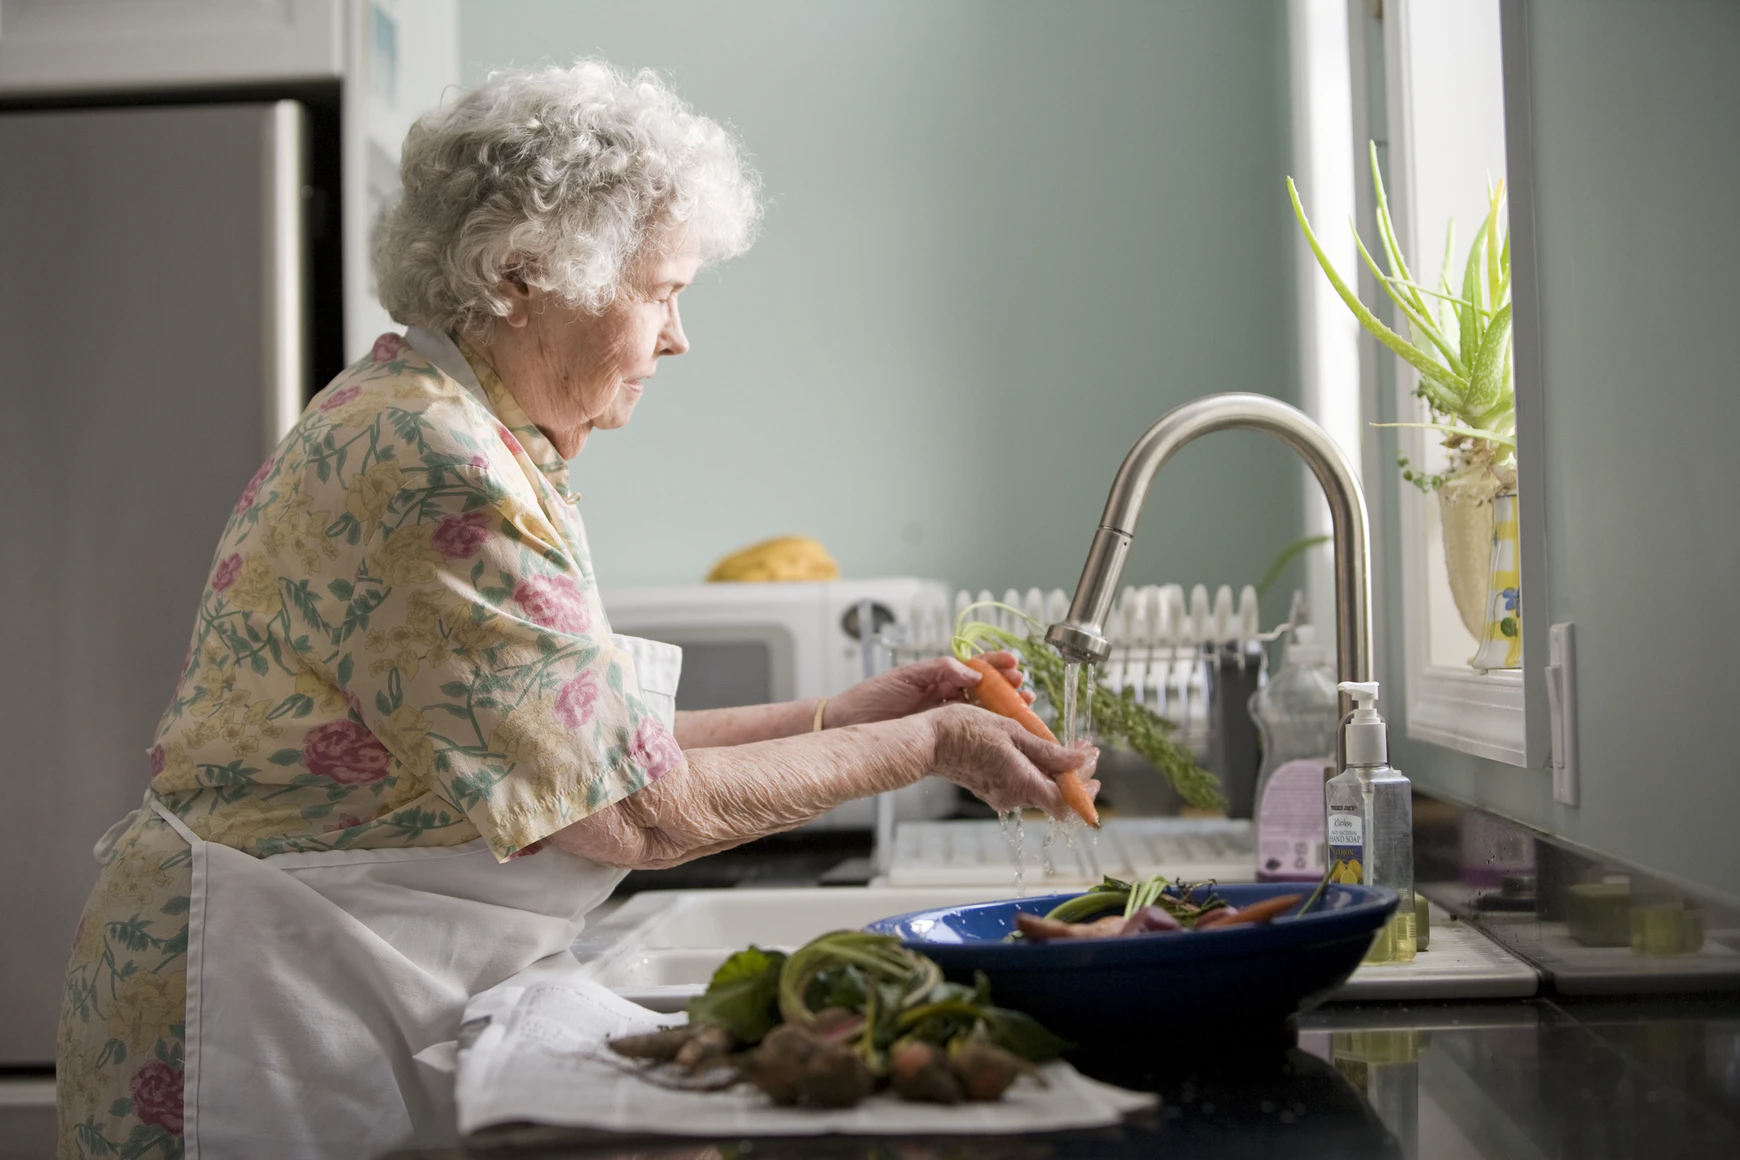 An older lady is pictured washing a carrot. | Source: Unsplash